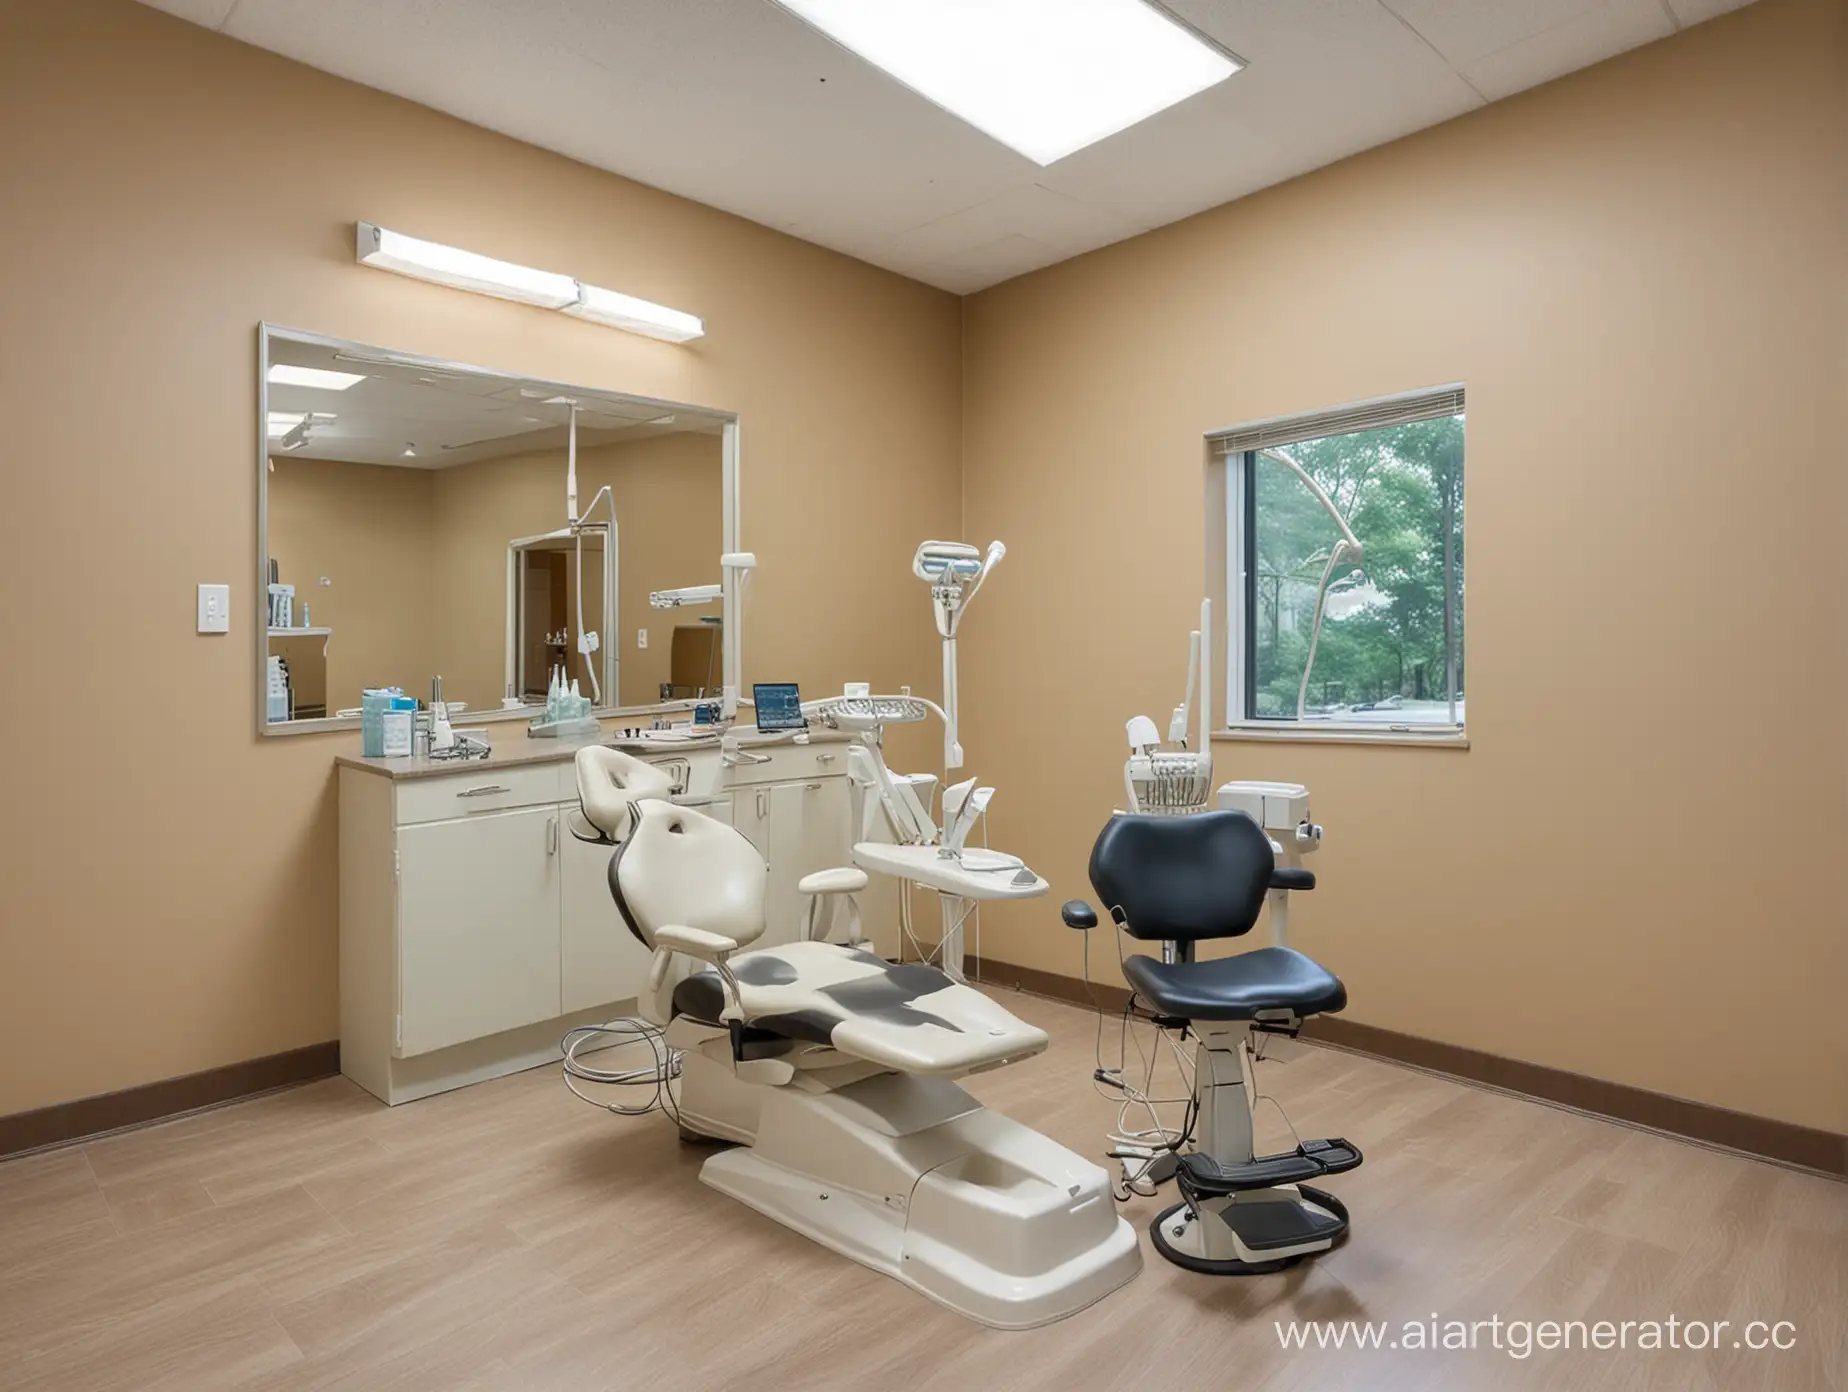 Modern-Dentists-Office-with-Bright-Lighting-and-Comfortable-Seating